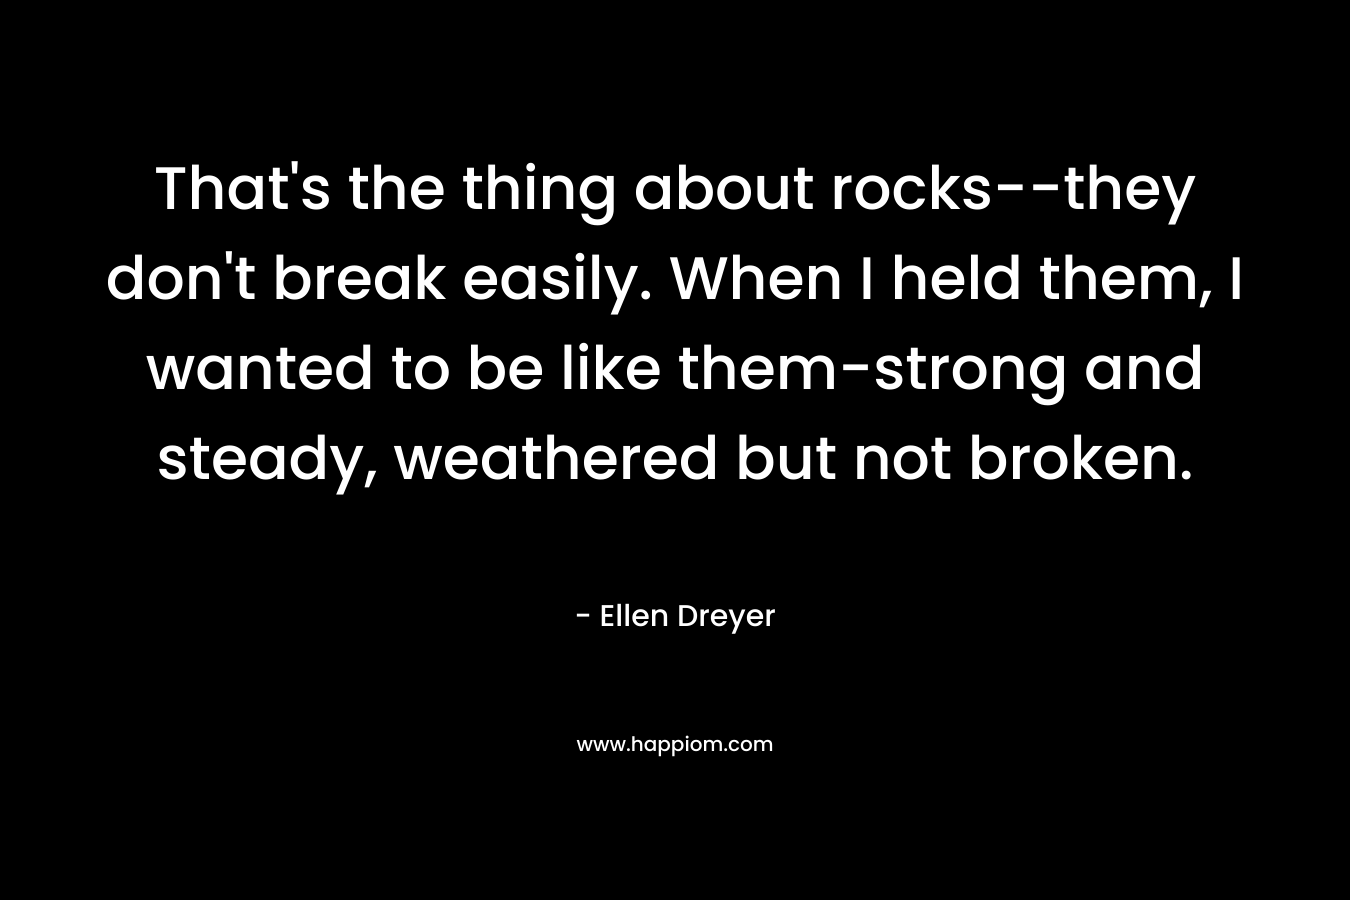 That’s the thing about rocks–they don’t break easily. When I held them, I wanted to be like them-strong and steady, weathered but not broken. – Ellen Dreyer